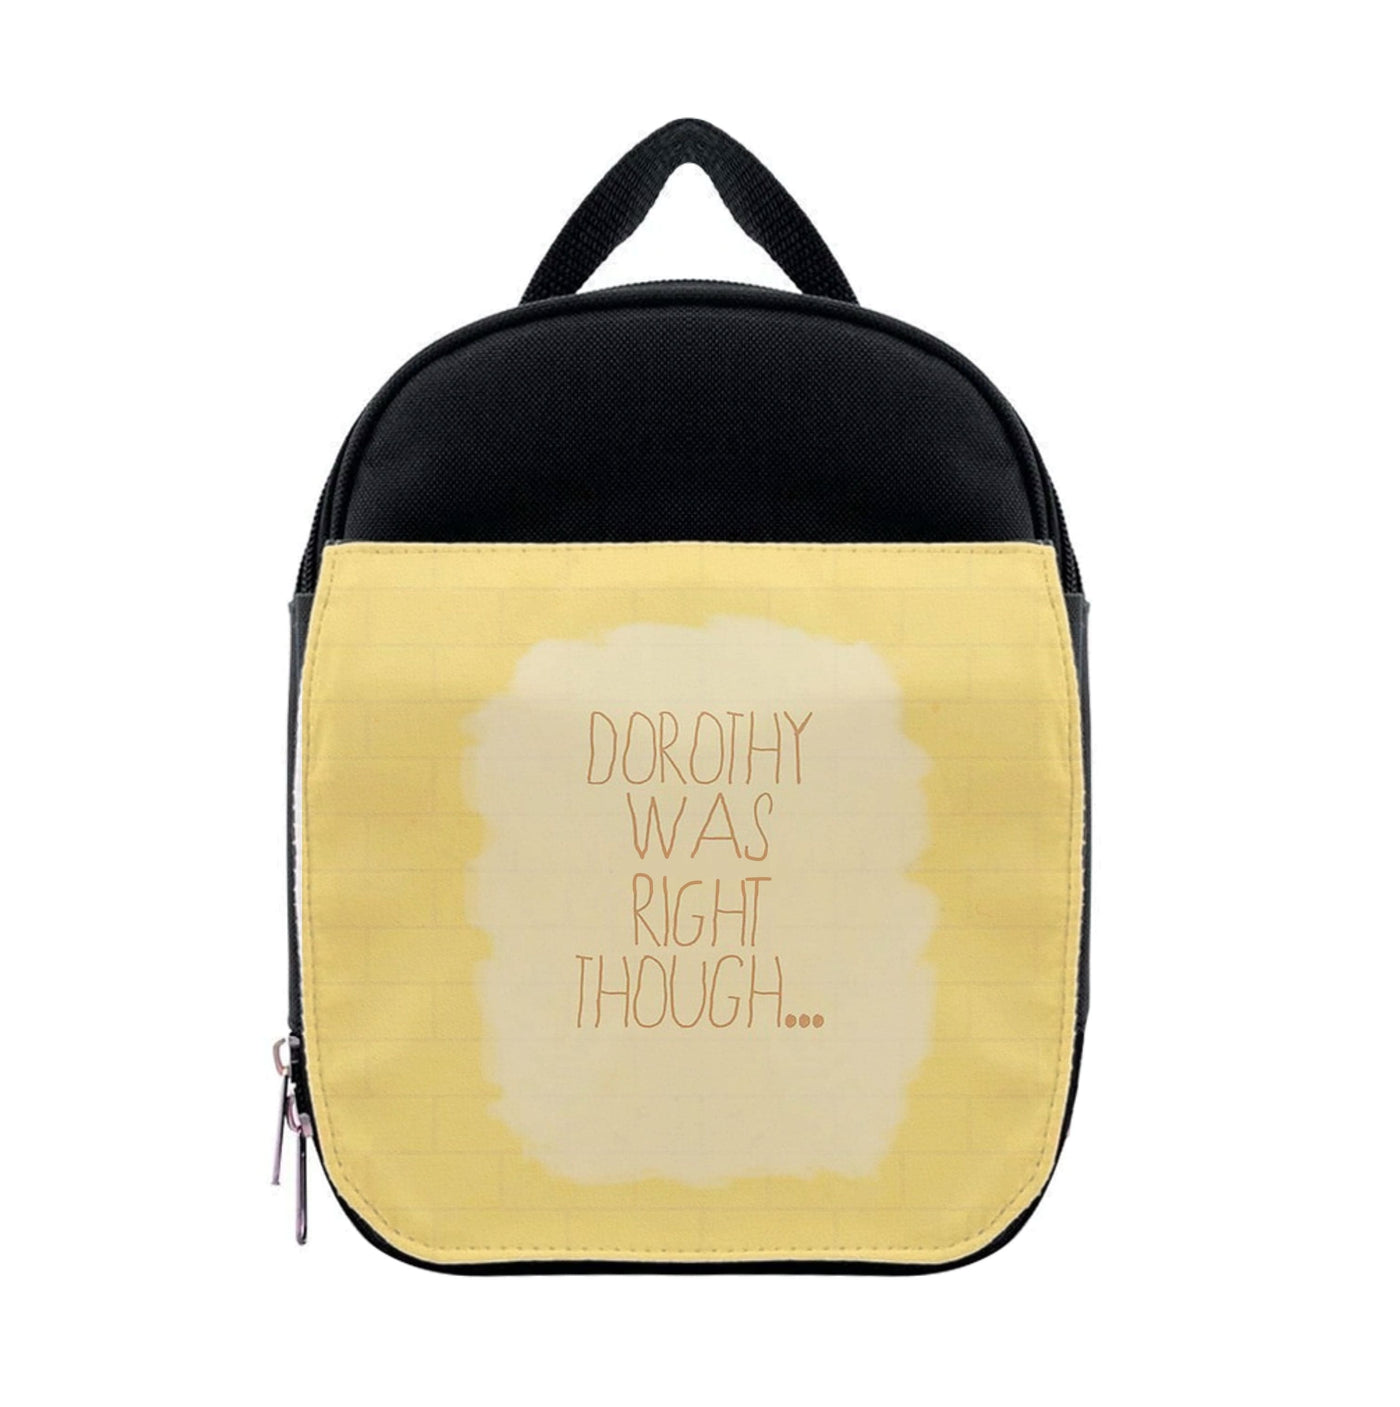 But Dorothy Was Right Though - Arctic Monkeys Lunchbox